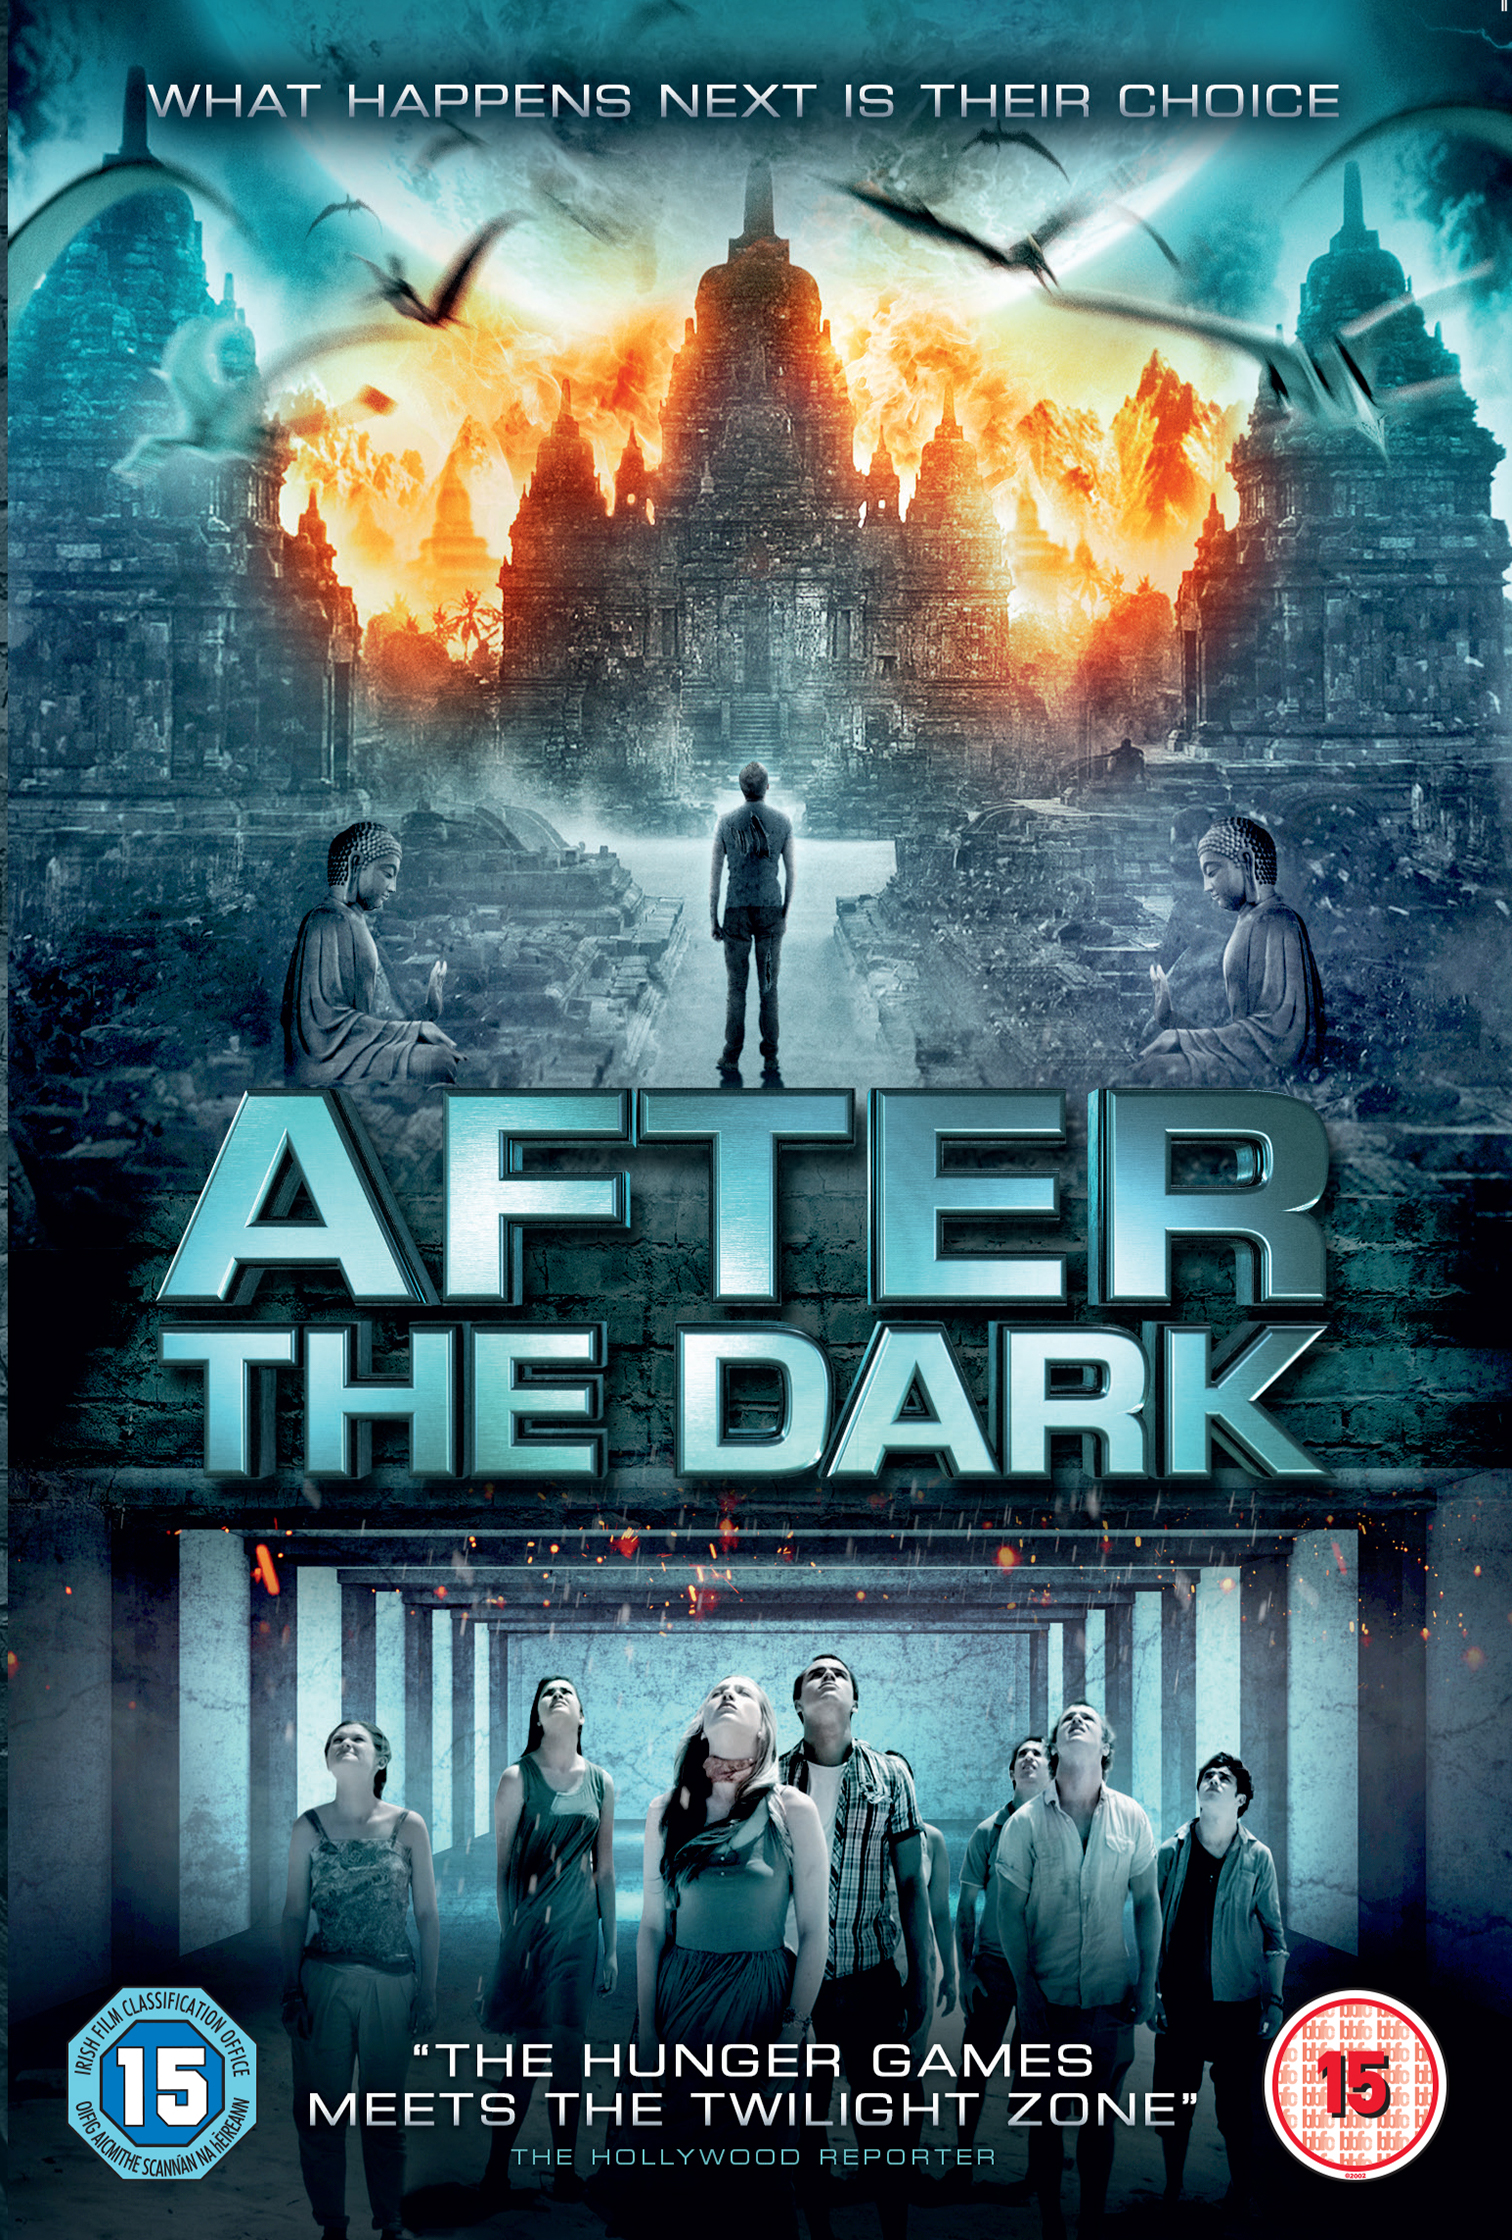 2013 After The Dark